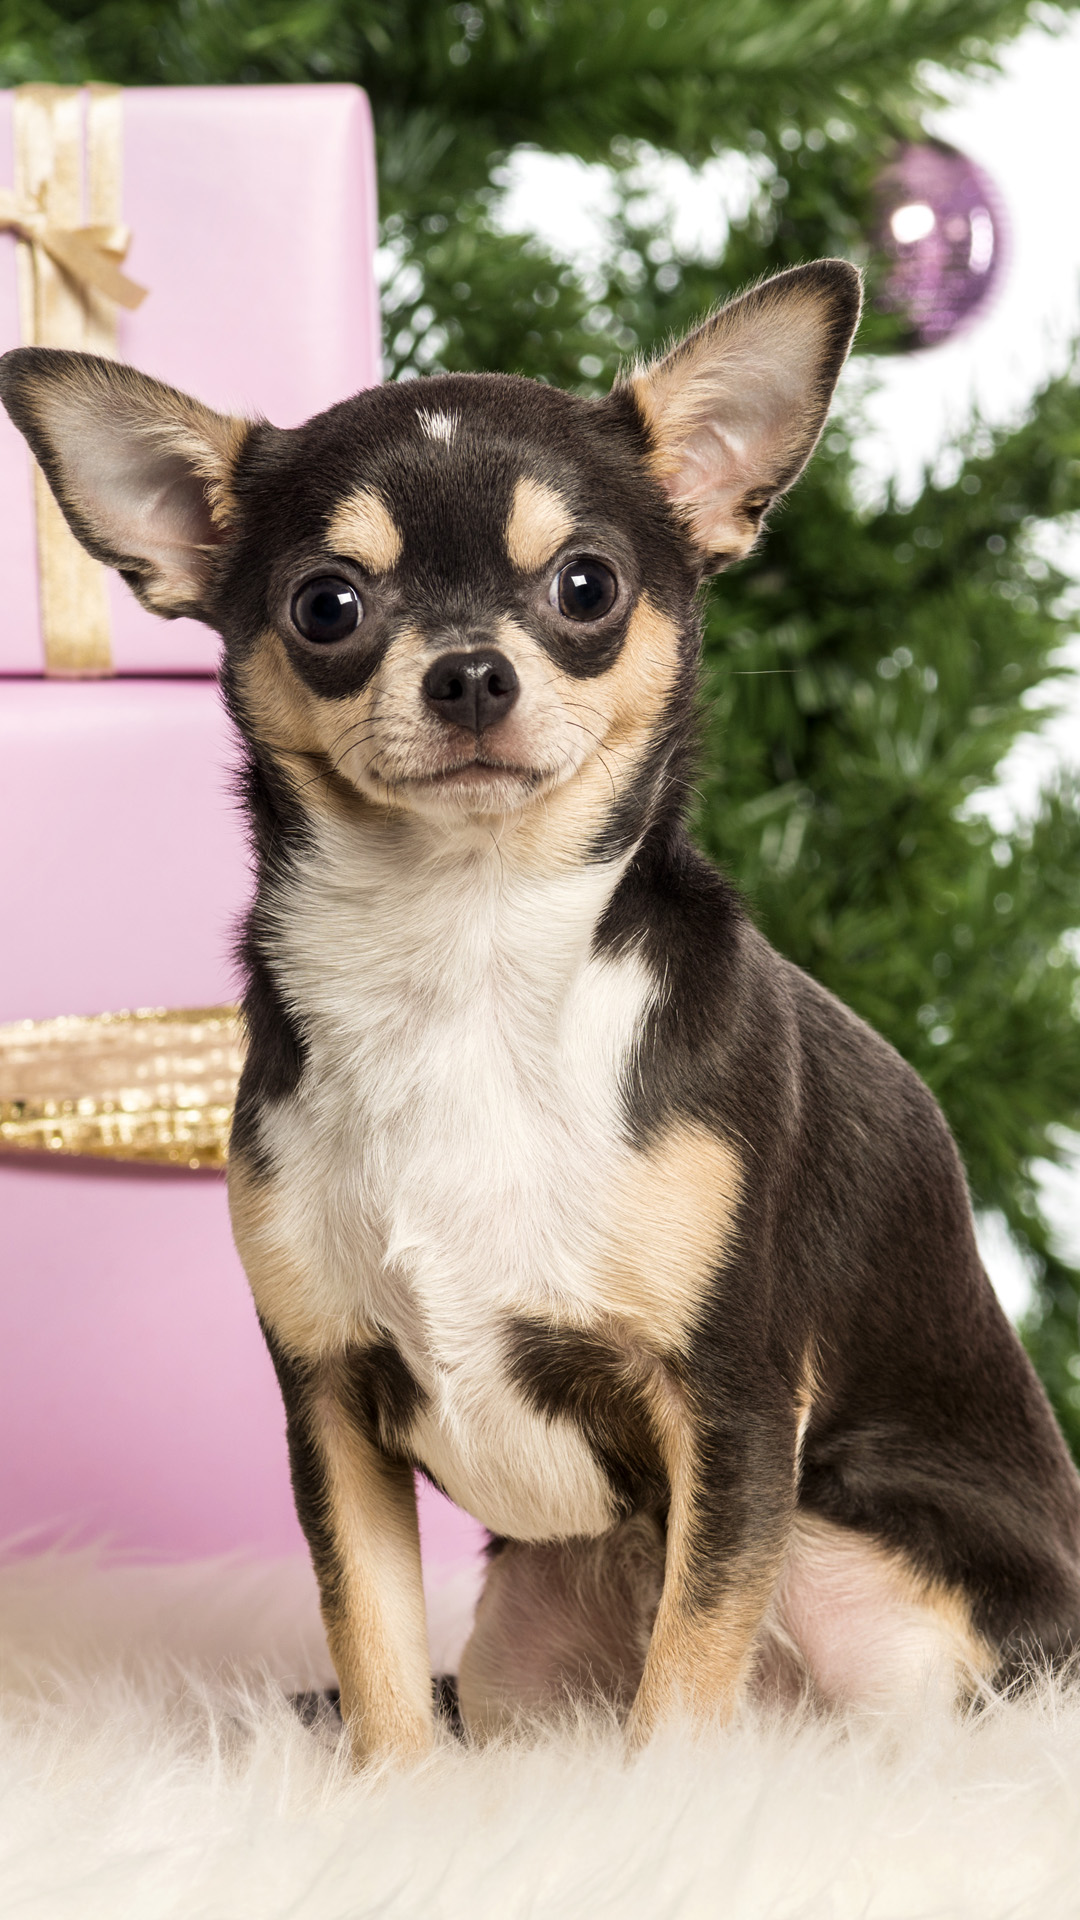 Chihuahua sitting in front of Christmas decorations